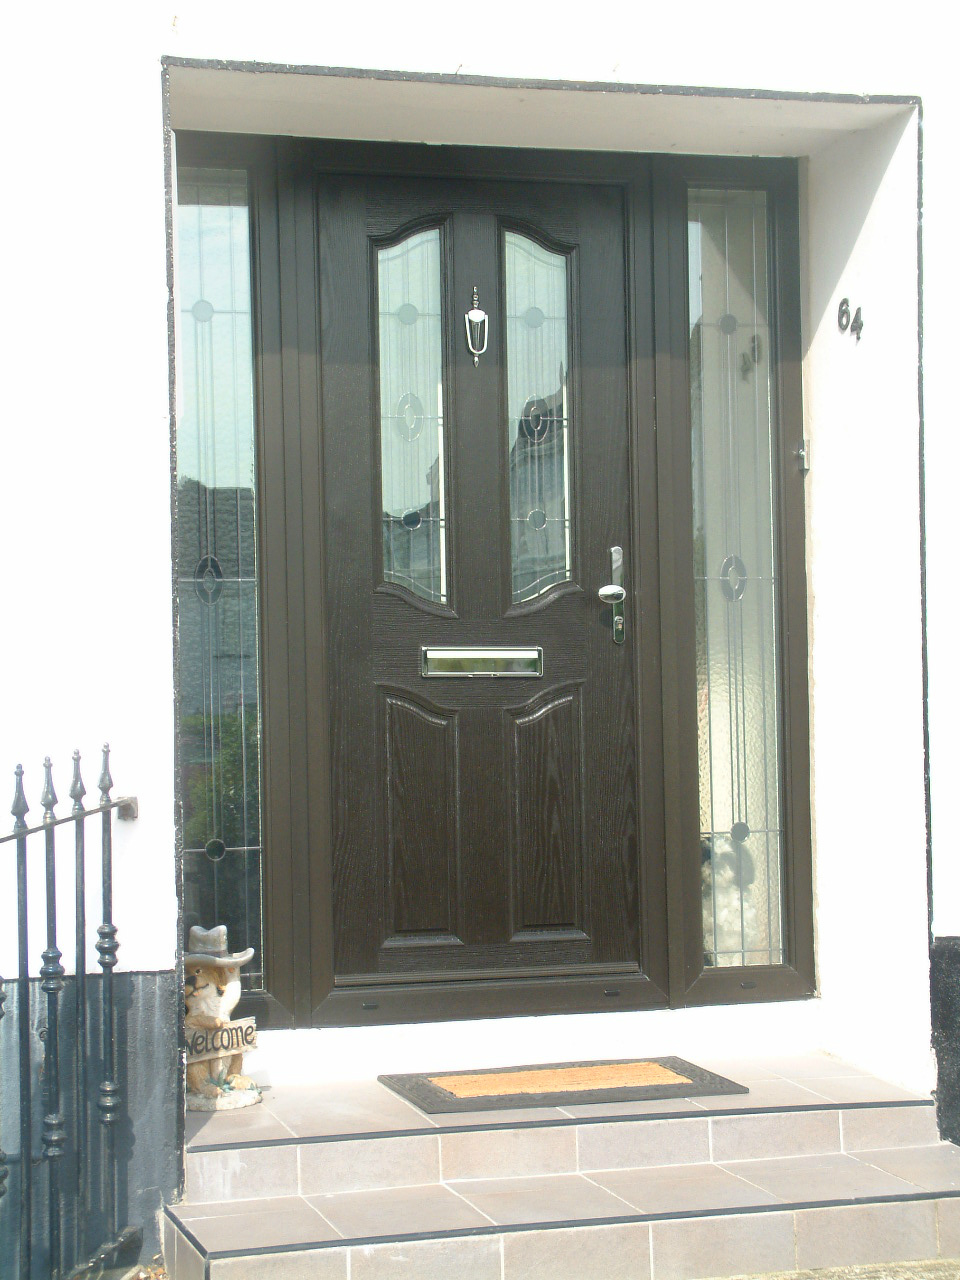 BLACK APEER COMPOSITE FRONT DOOR FITTED BY ASGARD WINDOWS IN BRAY.